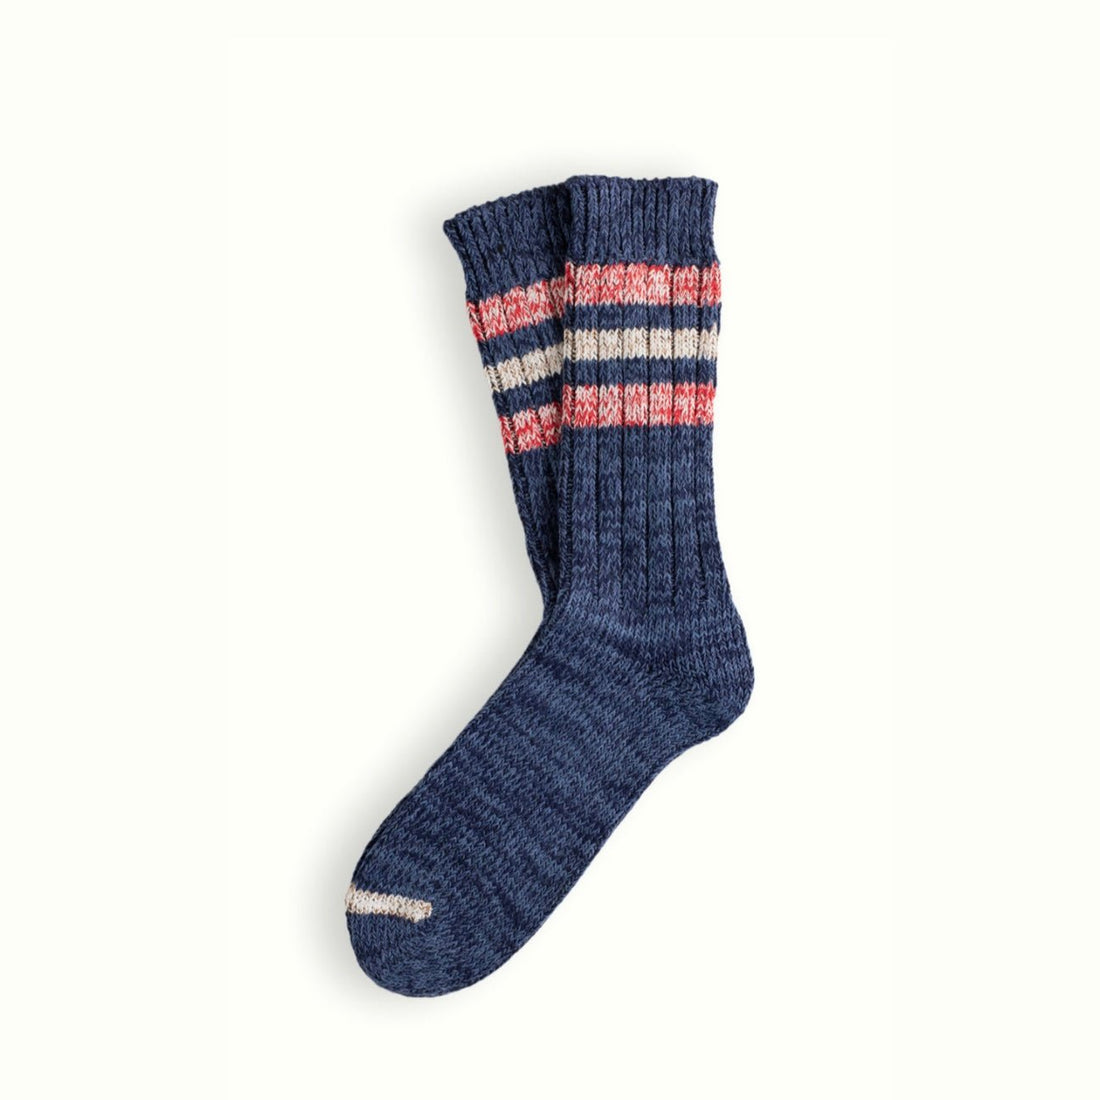 Thunders Love Socks - Outsiders Collection, Navy - The Flower Crate